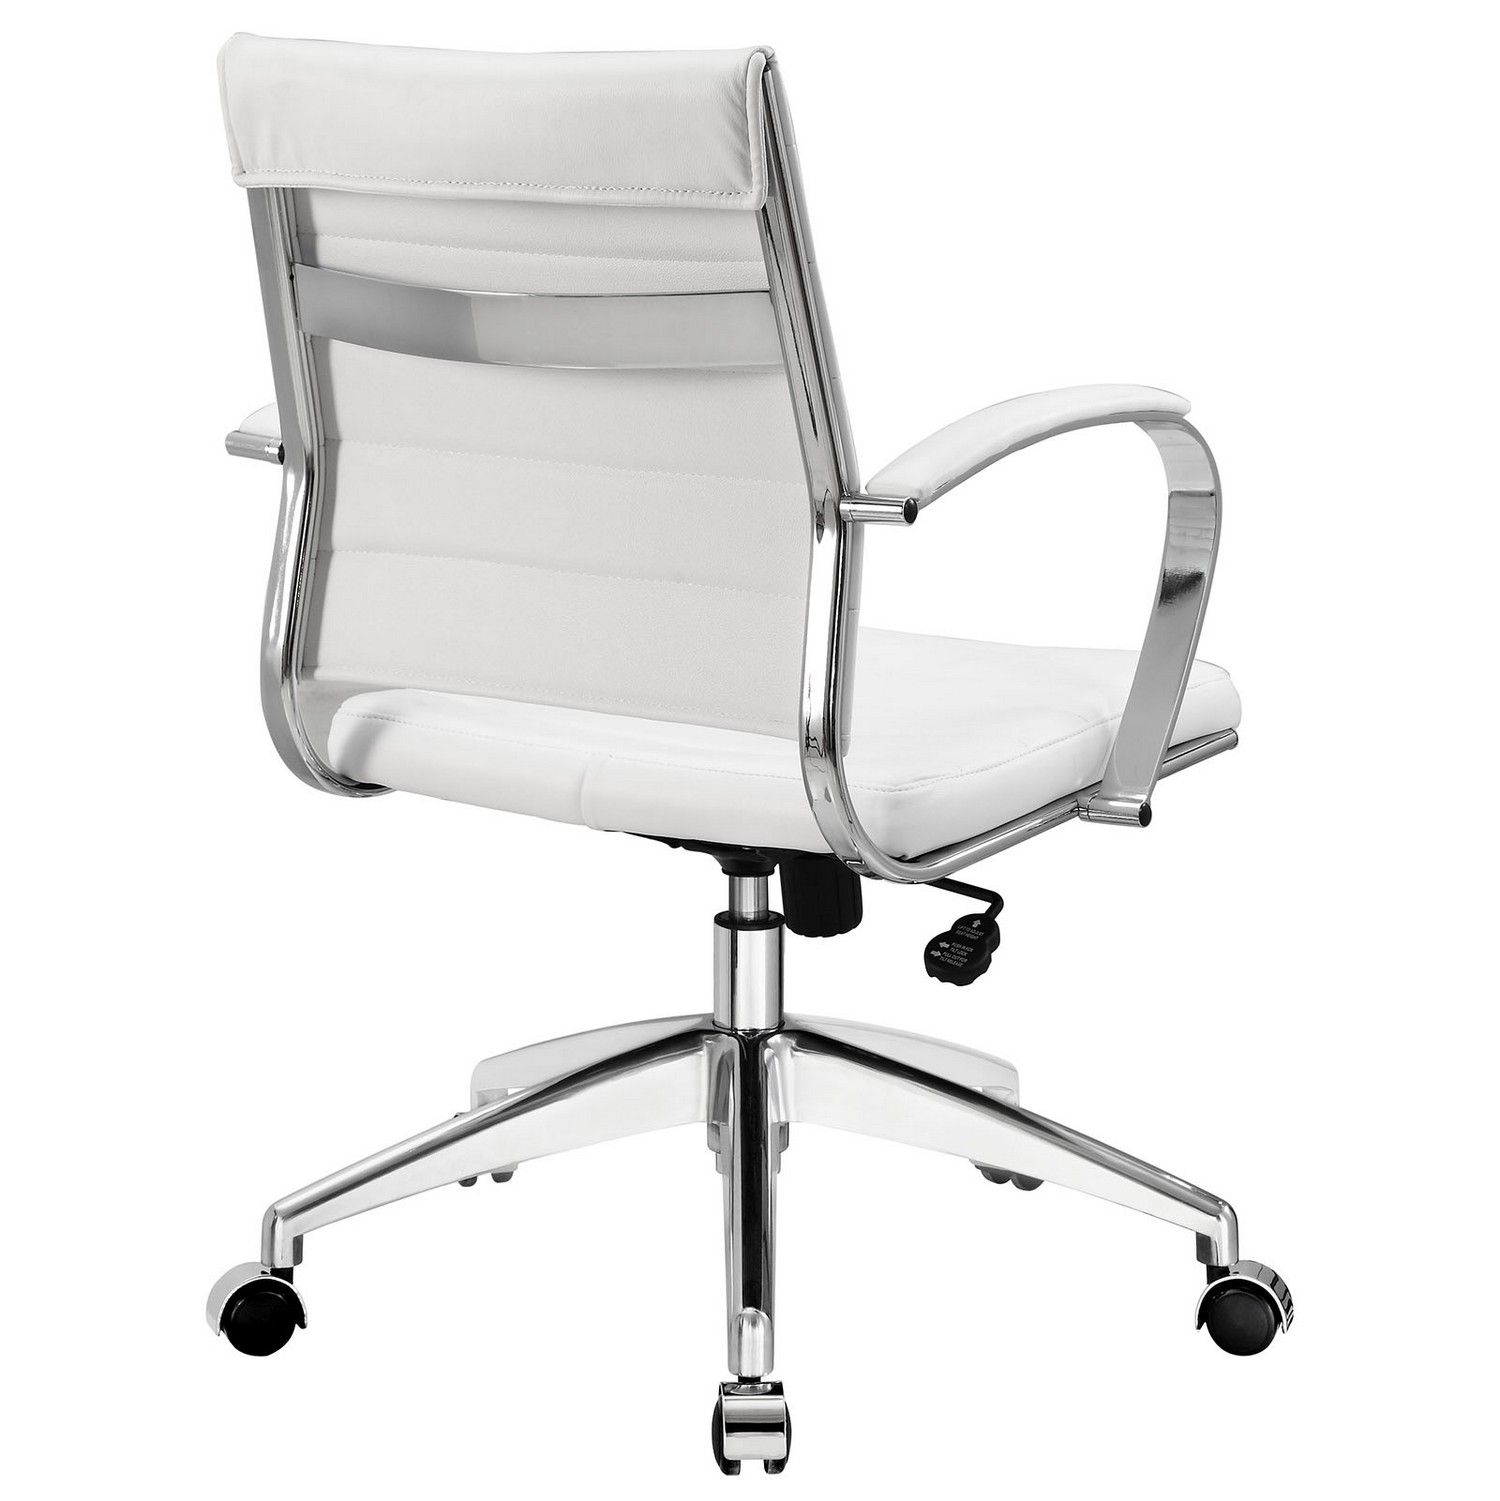 Modway Jive Mid Back Office Chair - White